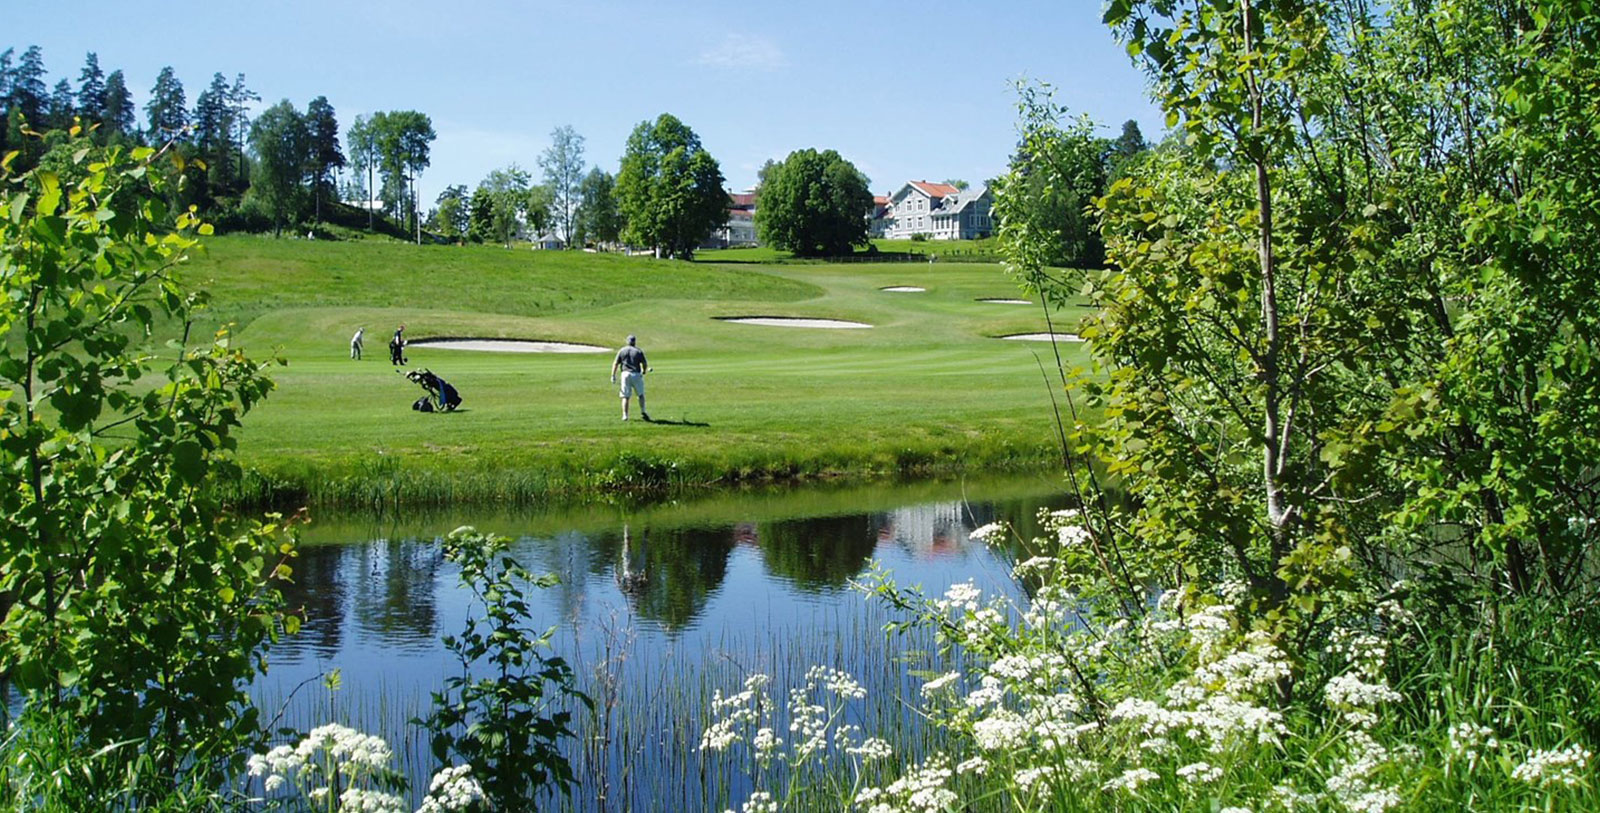 Experience a round of golf at one of Losby Gods' renowned golf courses.